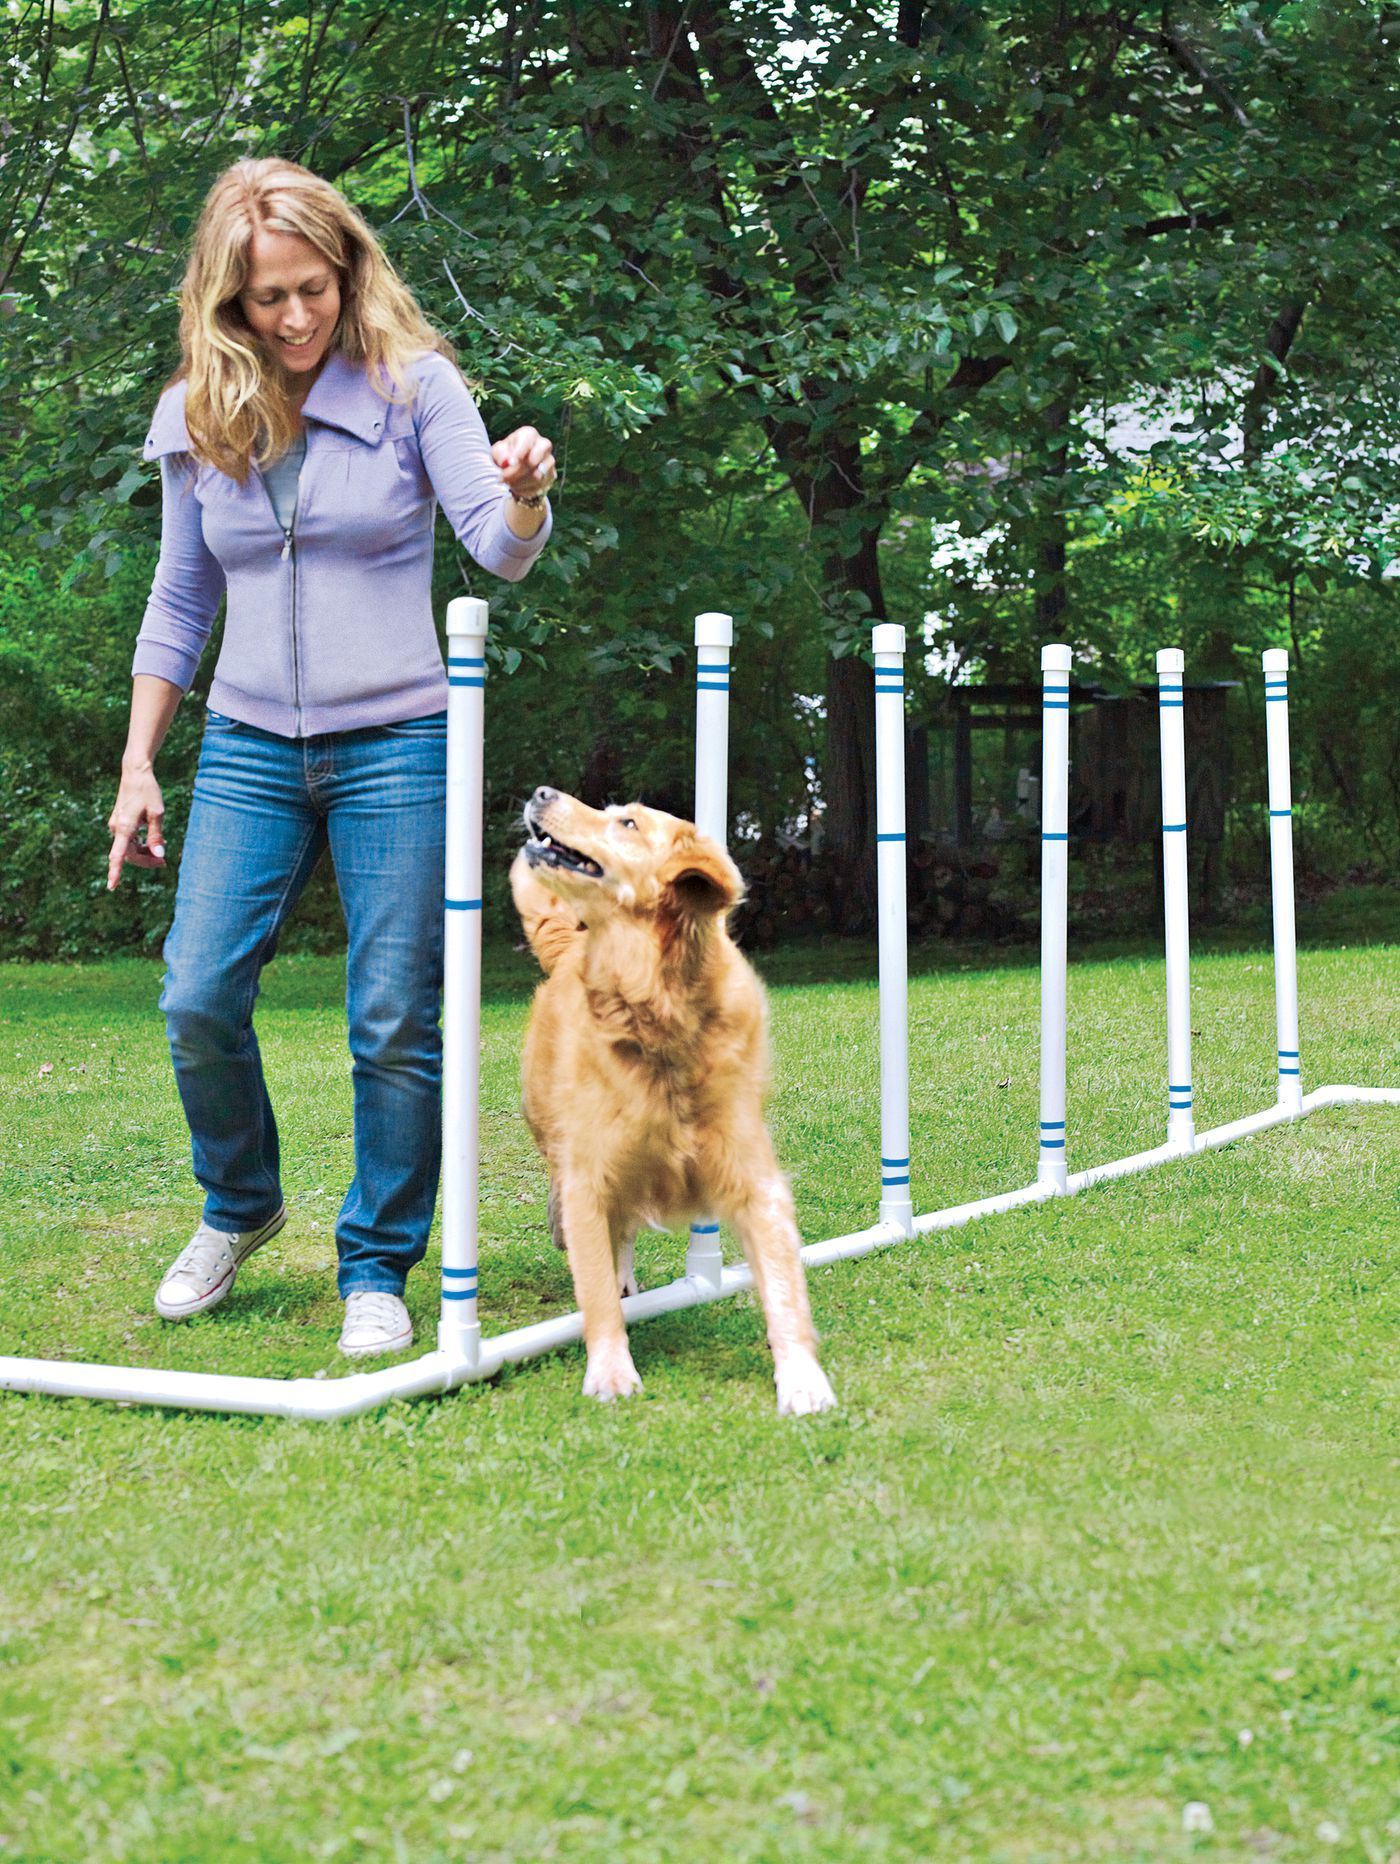 How to Build a DIY Dog Agility Course - How to Build a DIY Dog Agility Course -   17 diy Dog training ideas